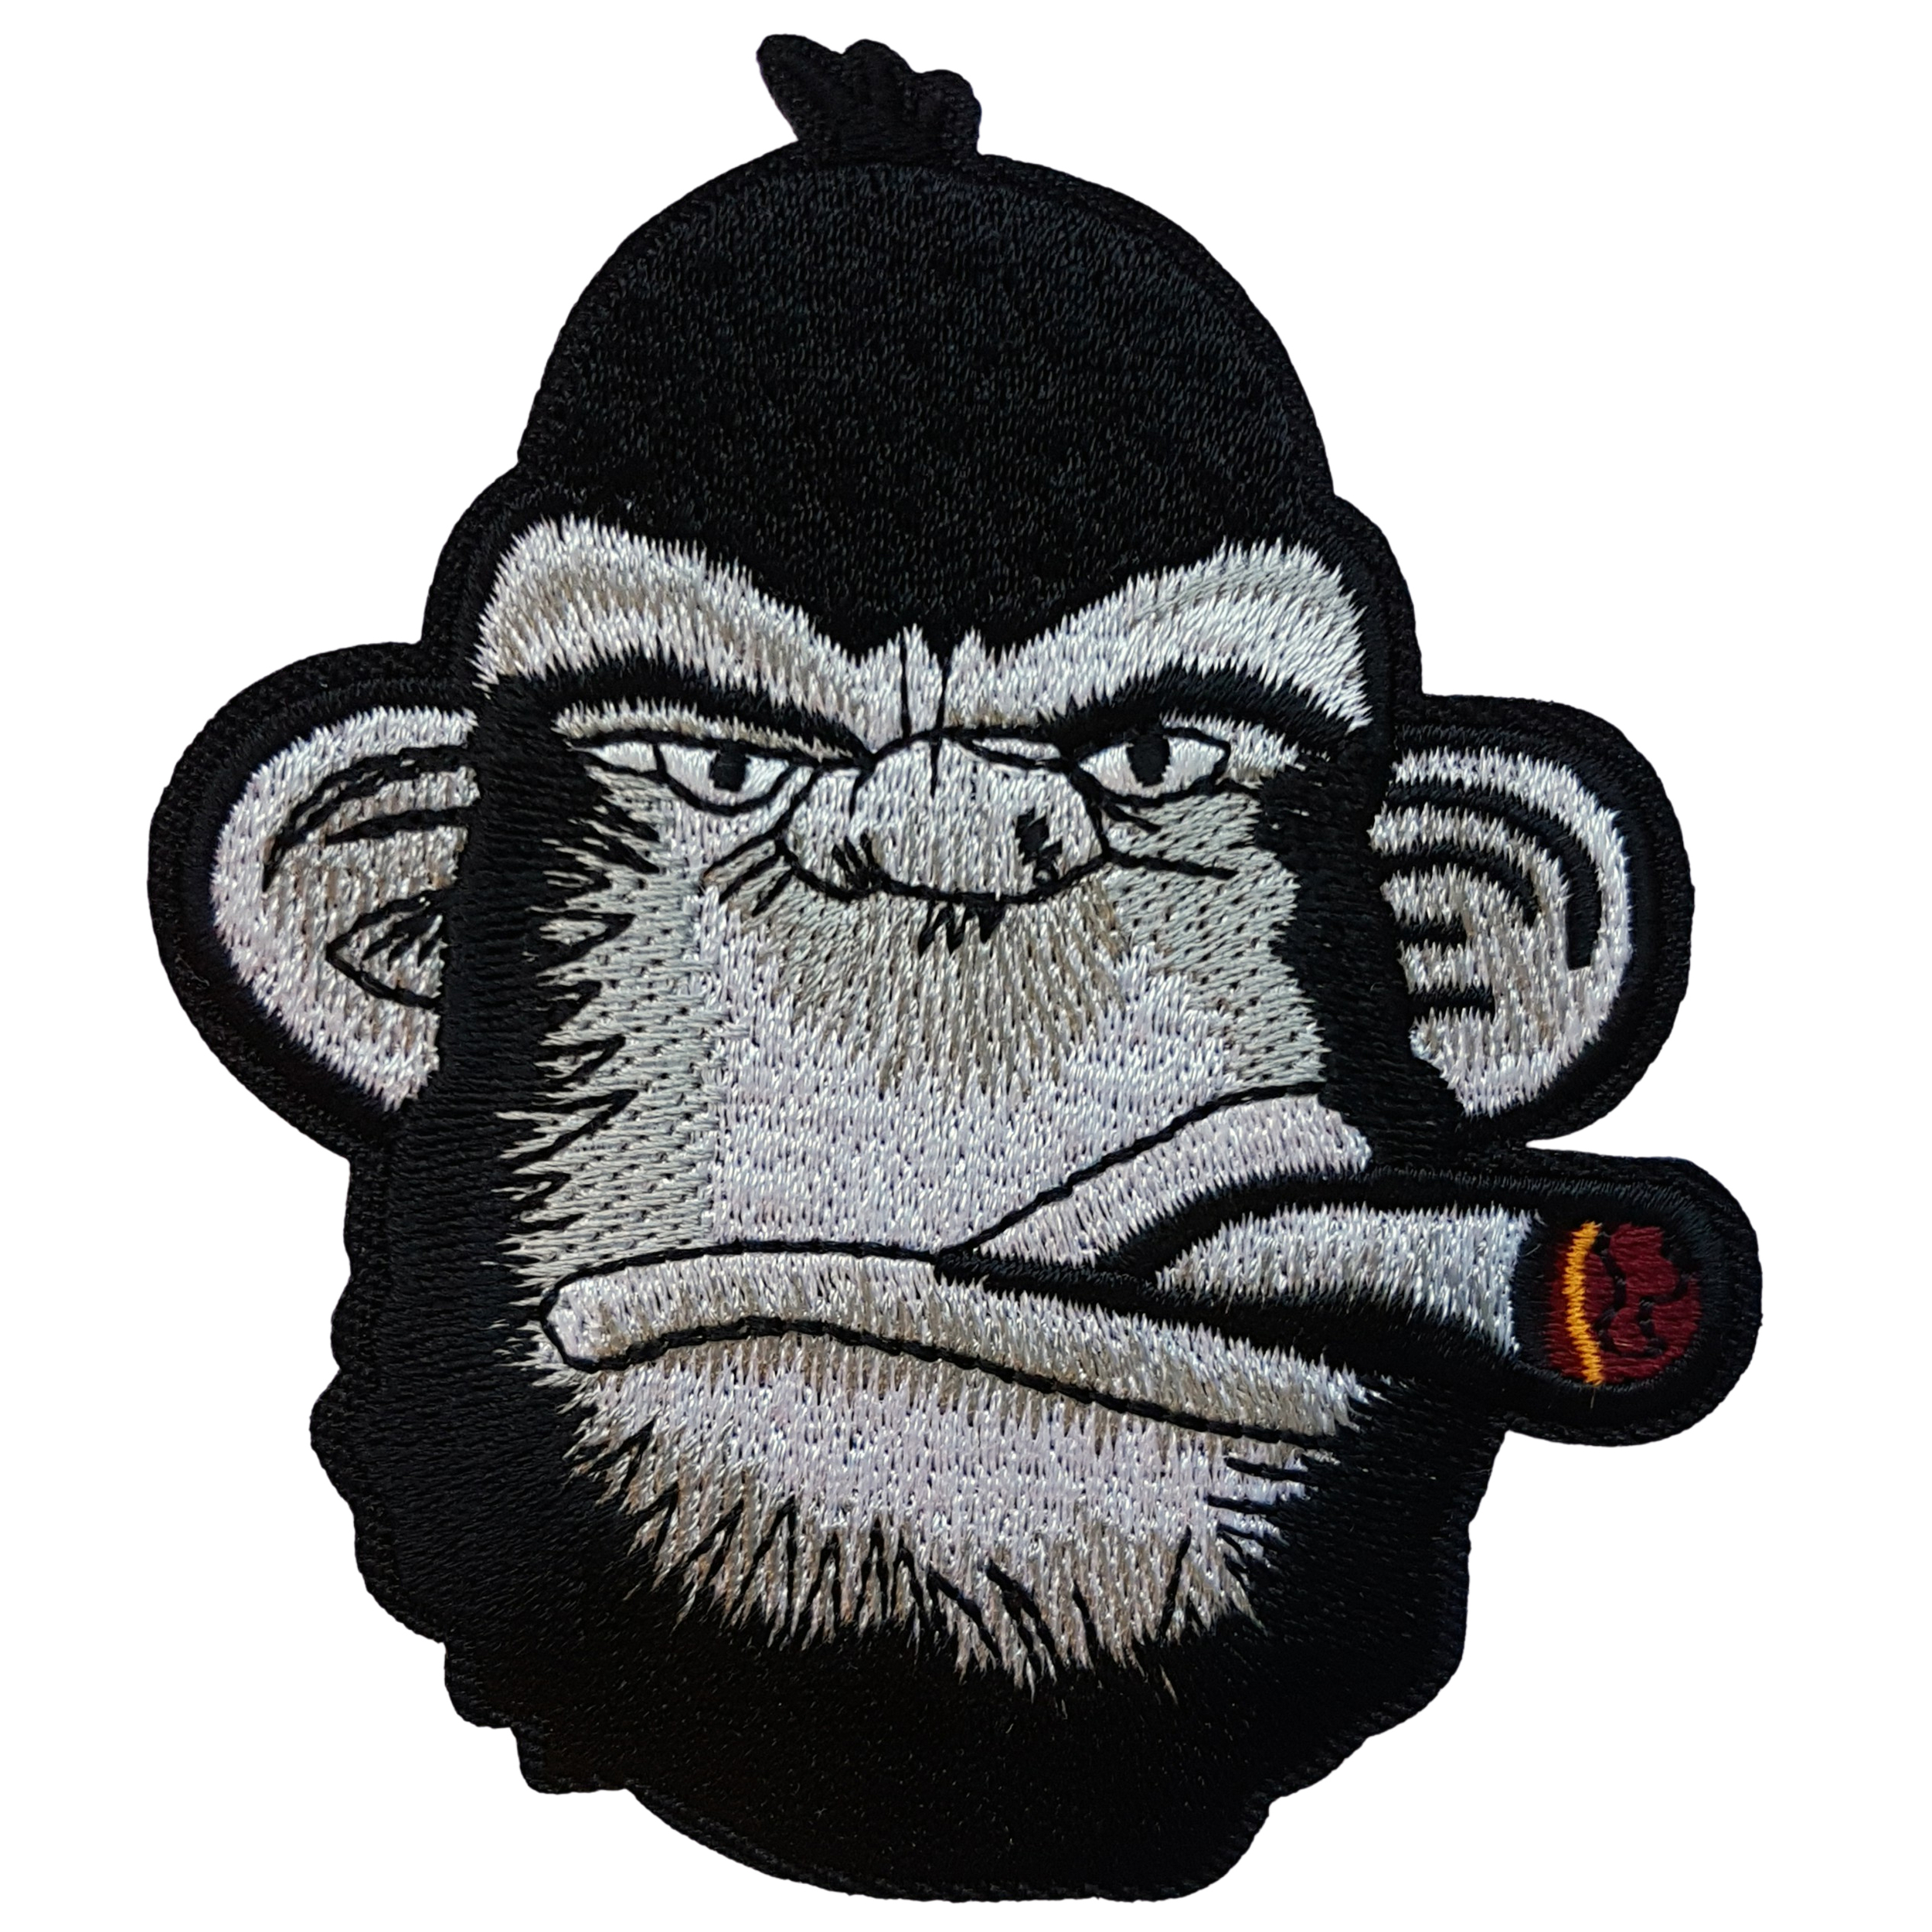 Patch Thermocollant Gorille Cigare Badass